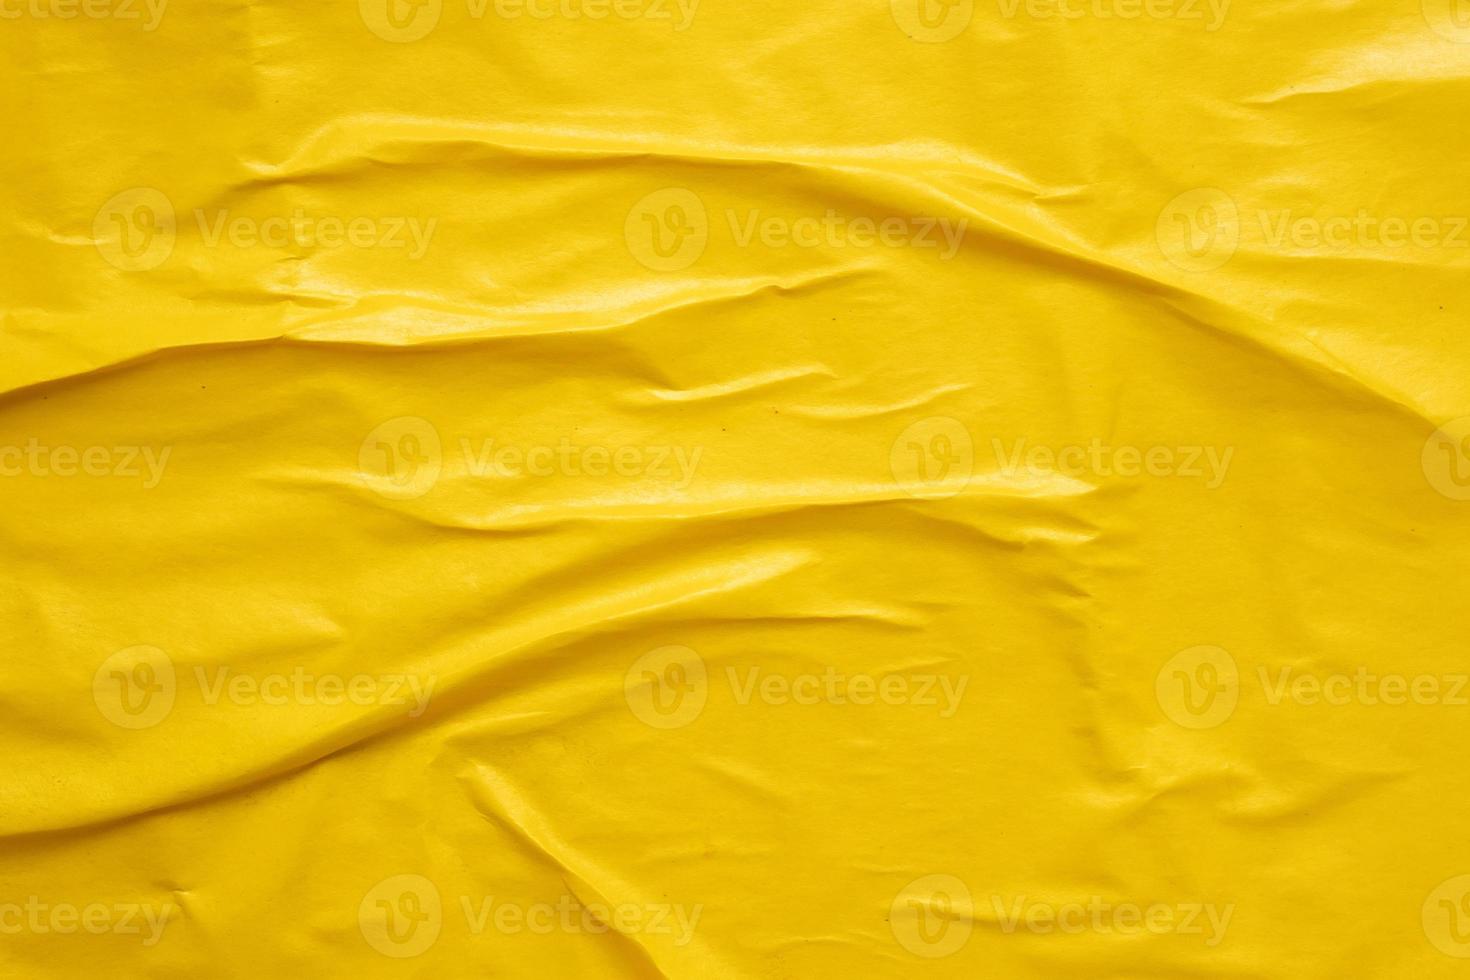 Blank yellow crumpled and creased paper poster texture background photo